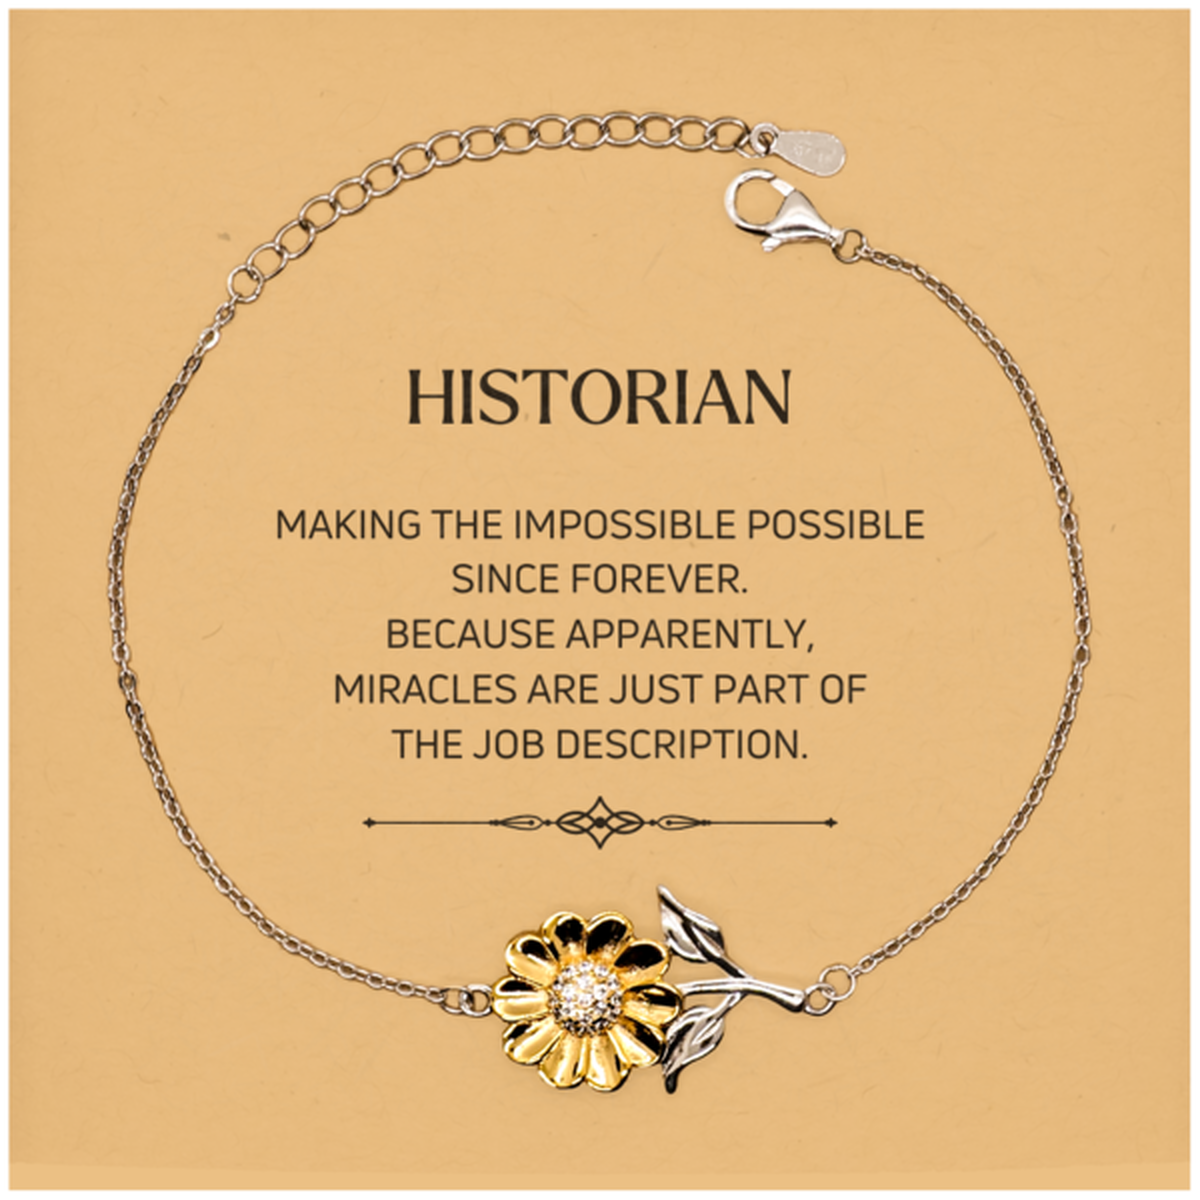 Funny Historian Gifts, Miracles are just part of the job description, Inspirational Birthday Christmas Sunflower Bracelet For Historian, Men, Women, Coworkers, Friends, Boss